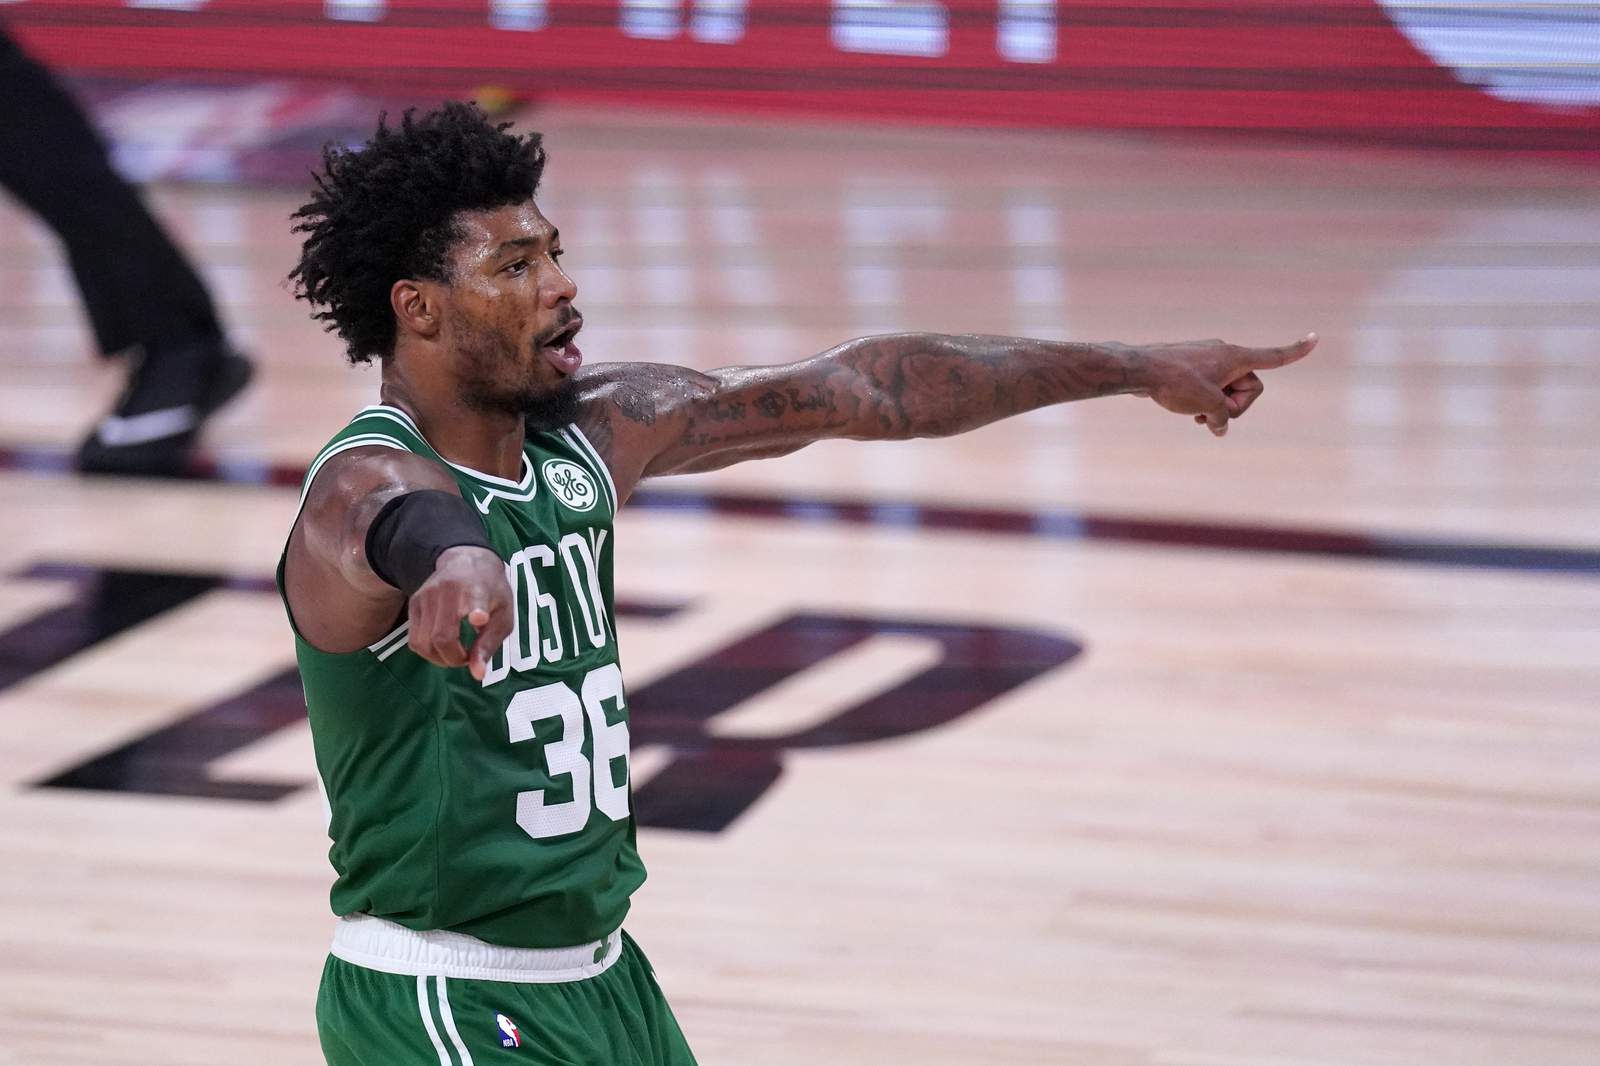 Back to work: Celtics, Heat start getting ready for Game 4